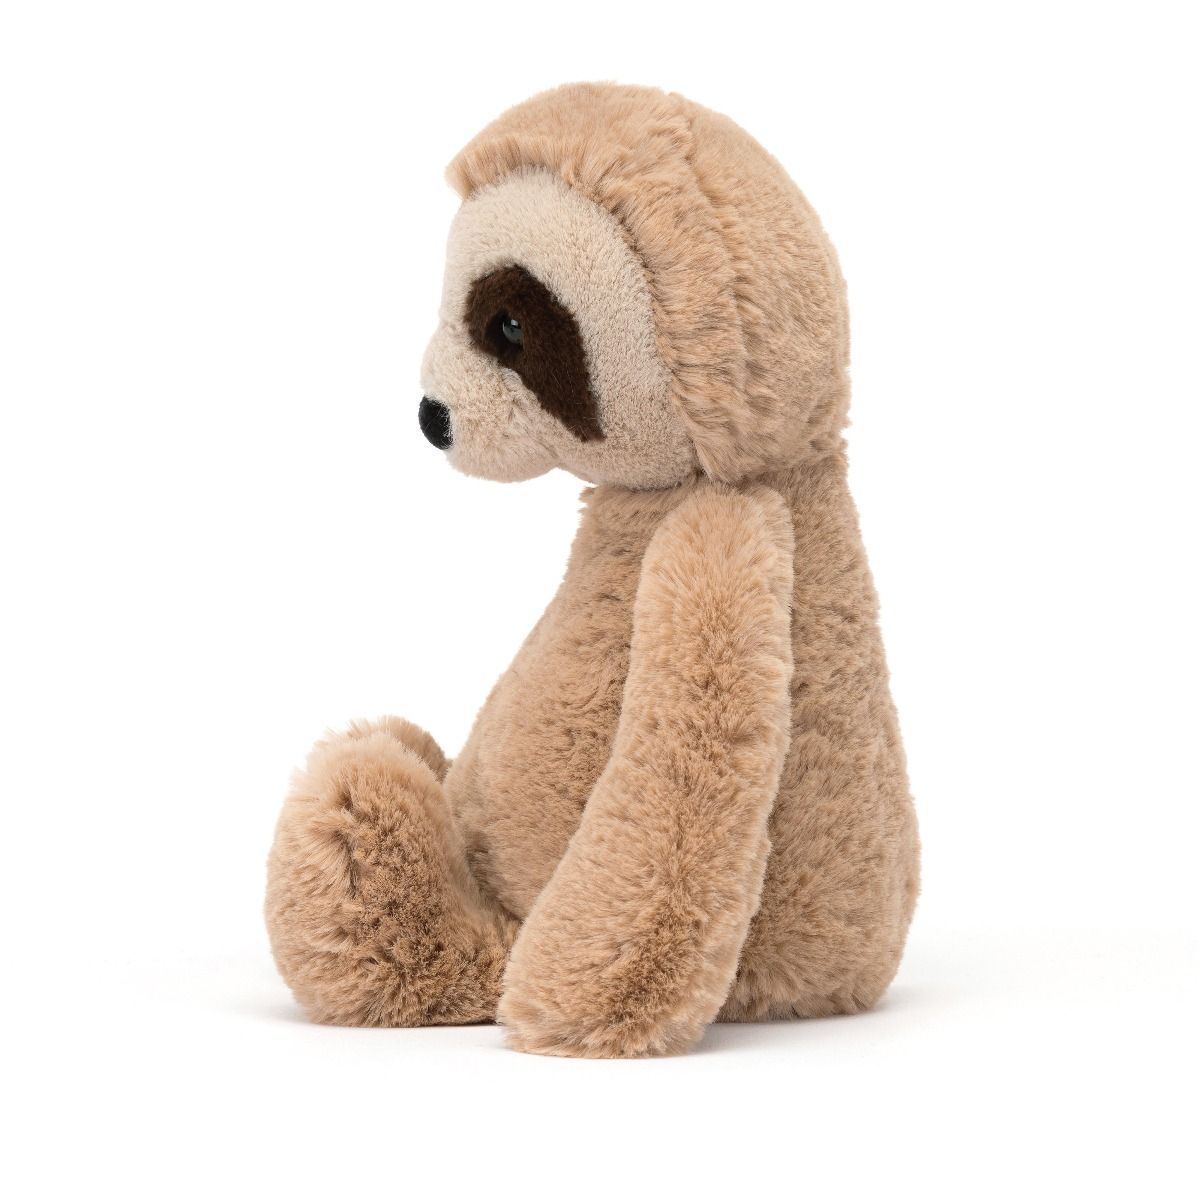 Jellycat sloth - angus and dudley